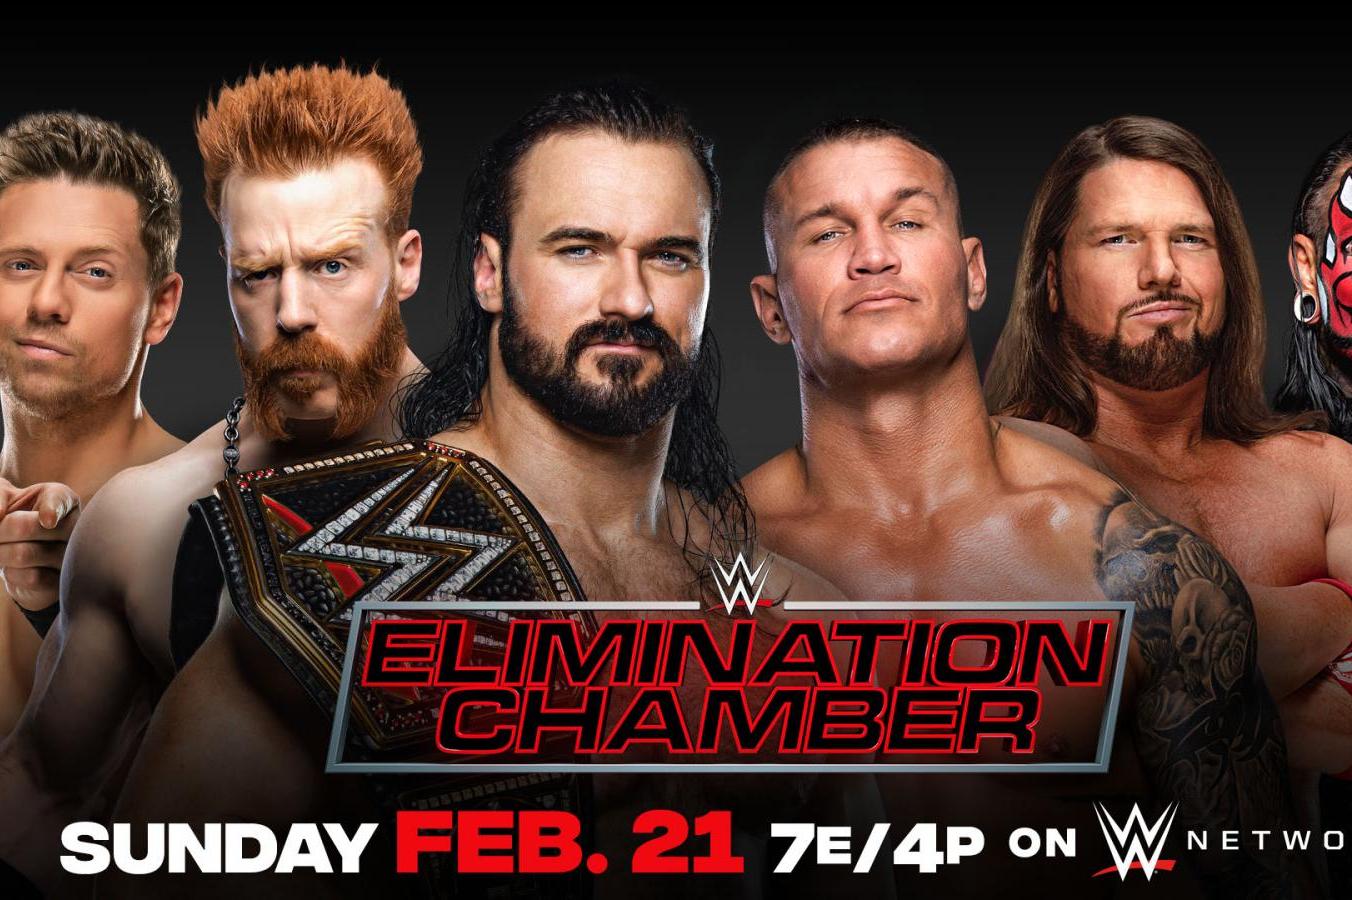 Wwe Elimination Chamber 2021 Match Card Predictions Ahead Of Go Home Raw Bleacher Report Latest News Videos And Highlights